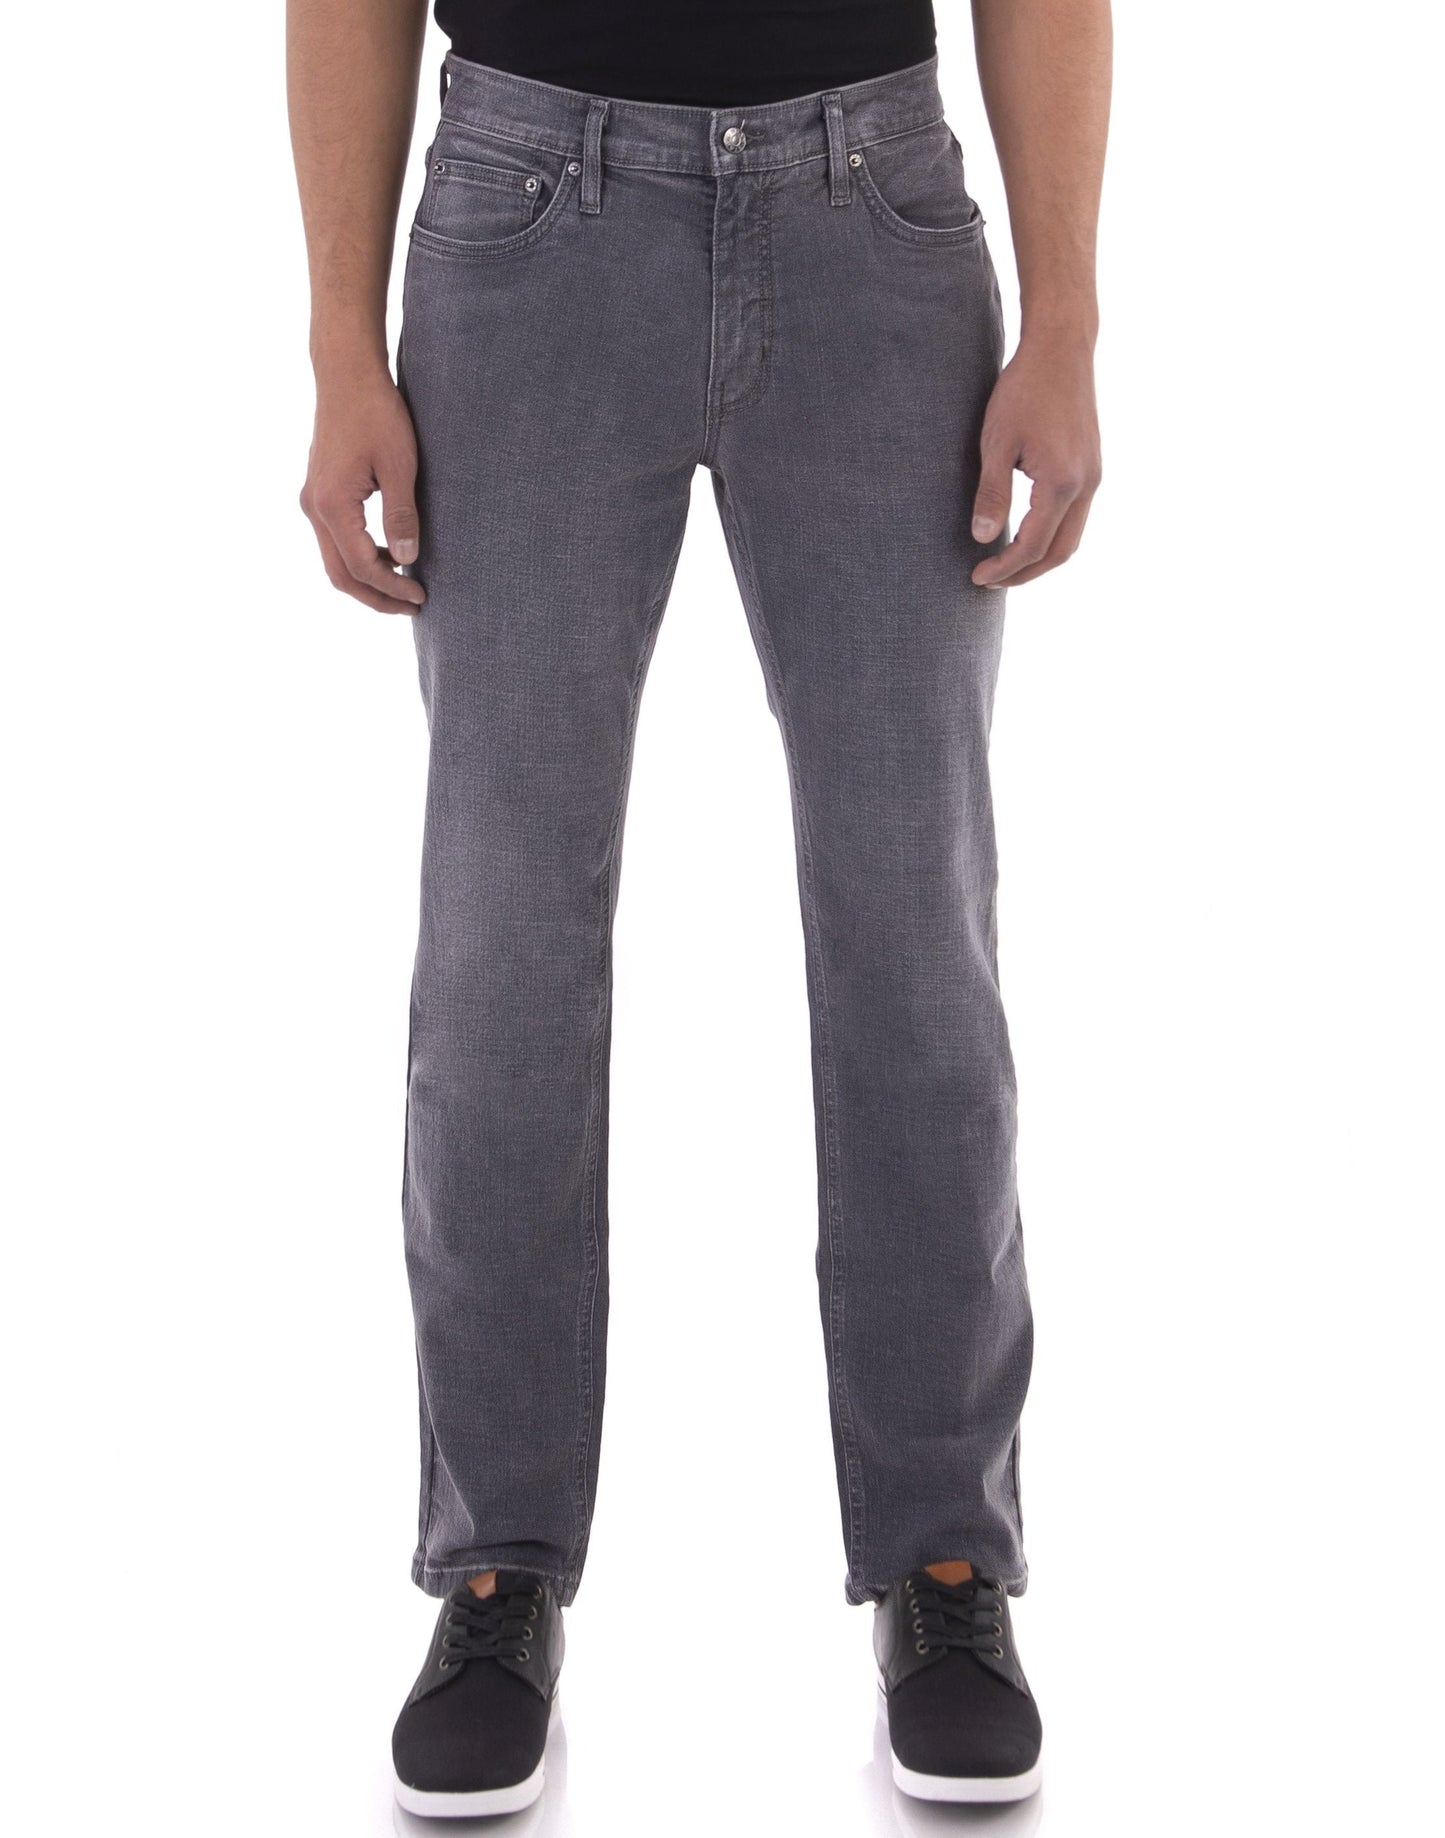 classic grey jeans with grey stitch, silver buttons. slim fit.